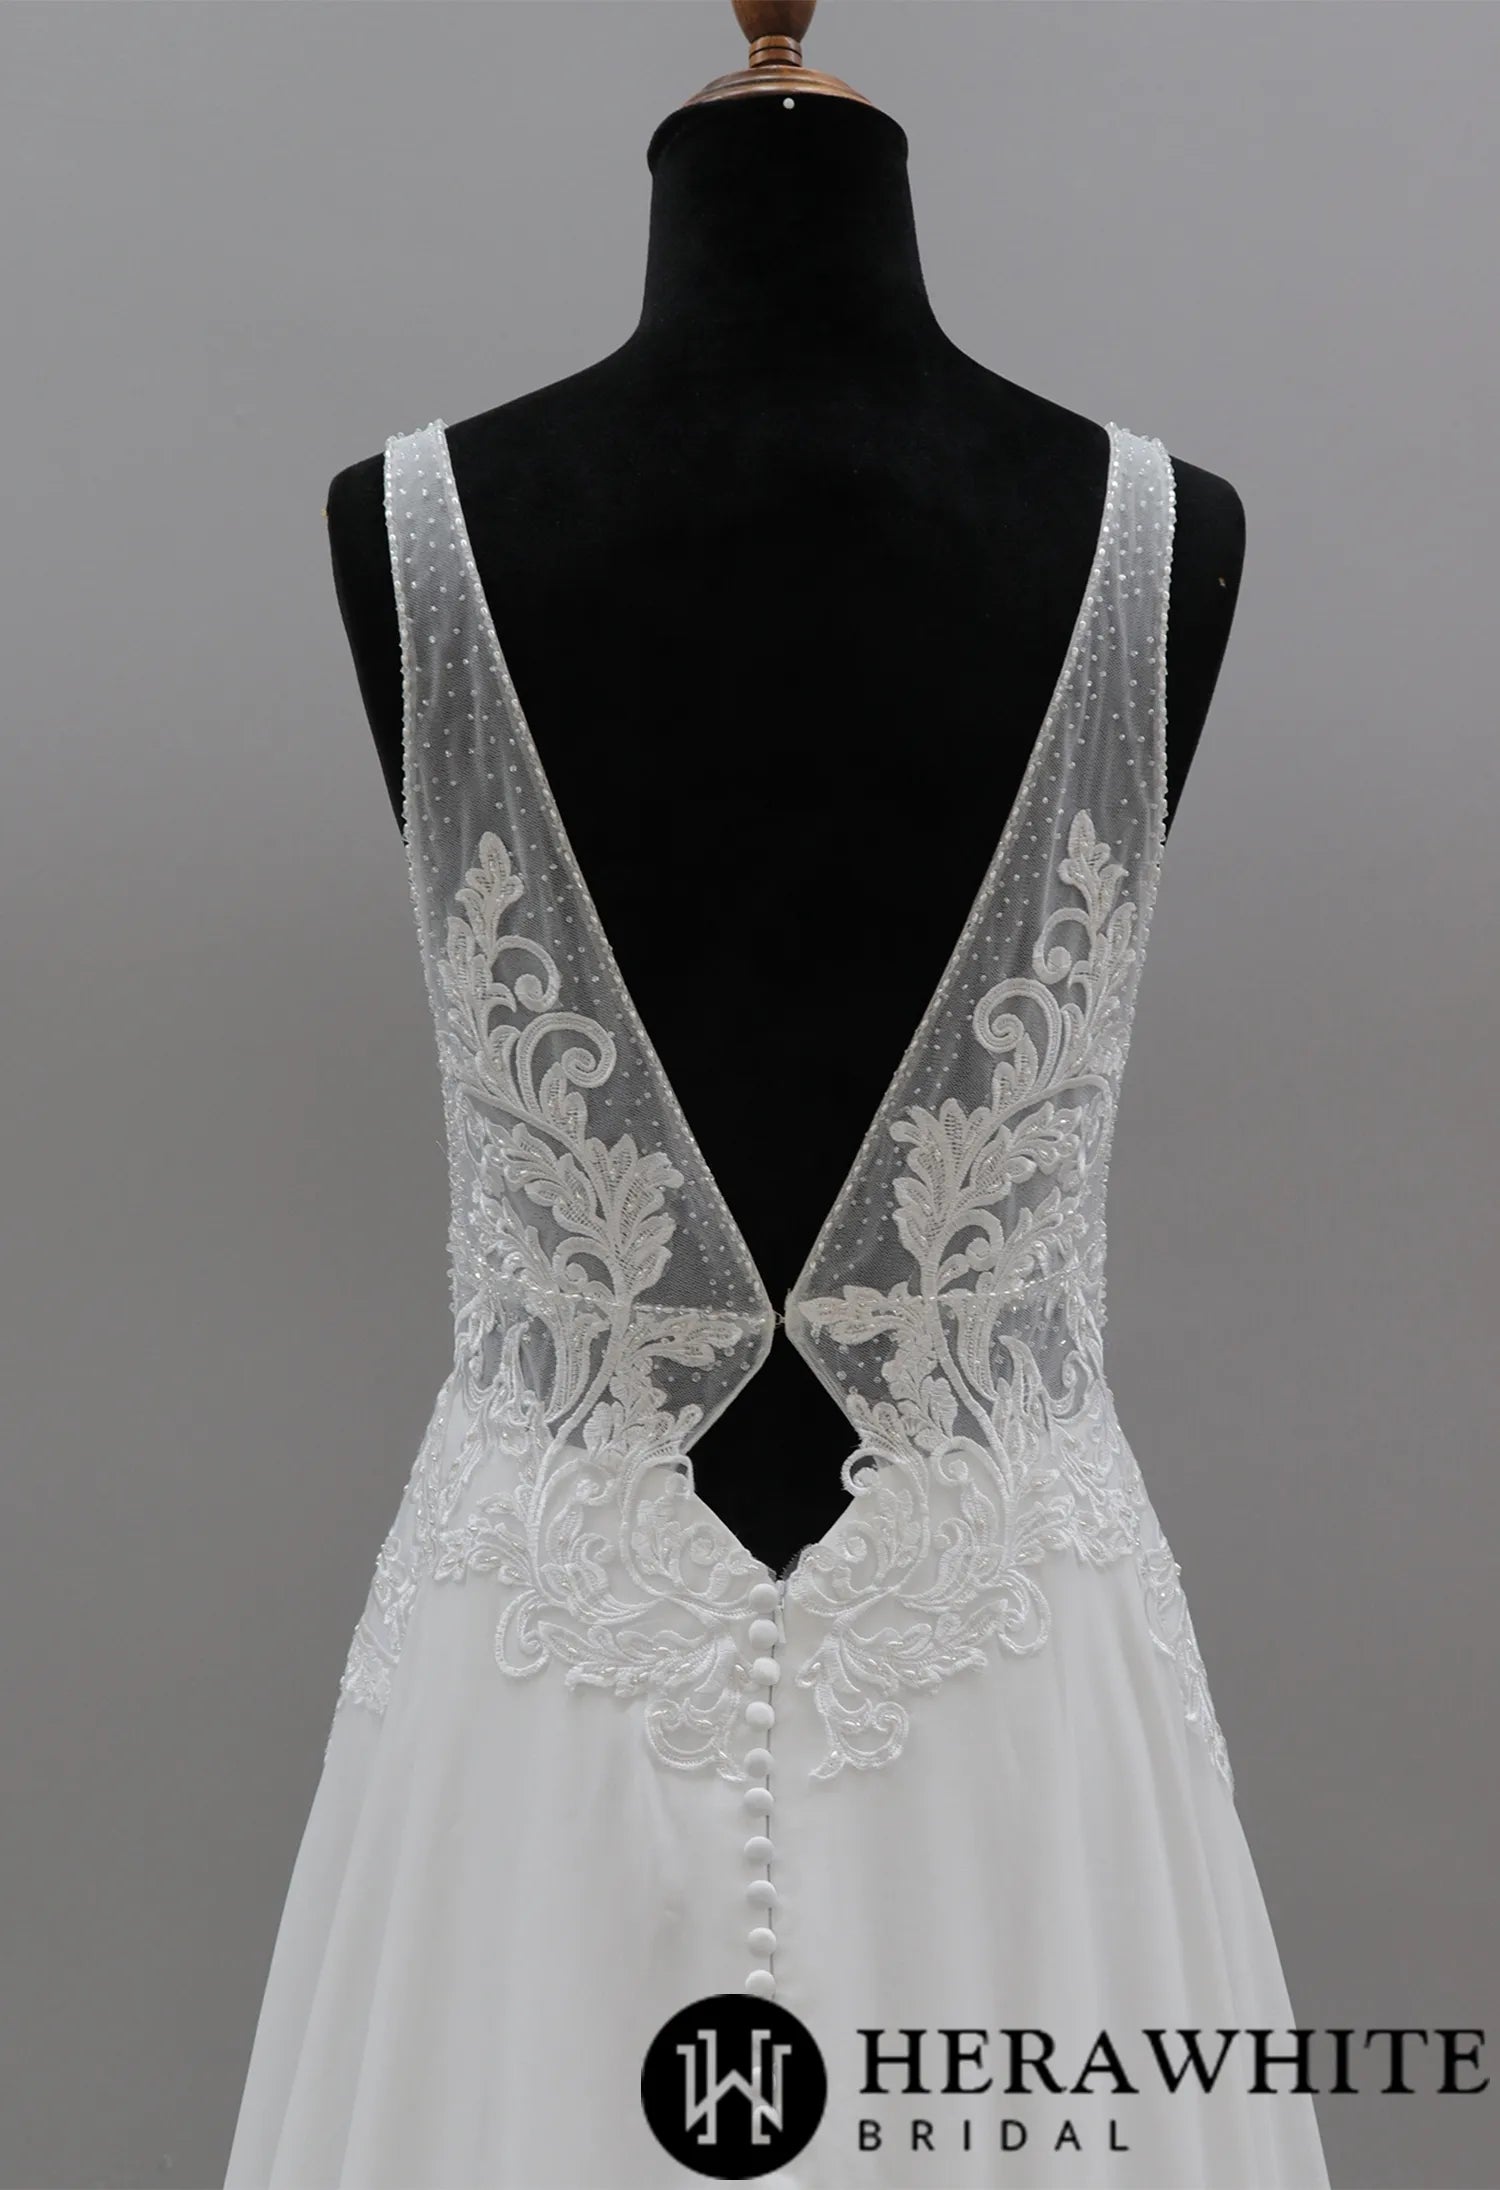 Modern A-line Wedding Dress with Floral Lace Bodice